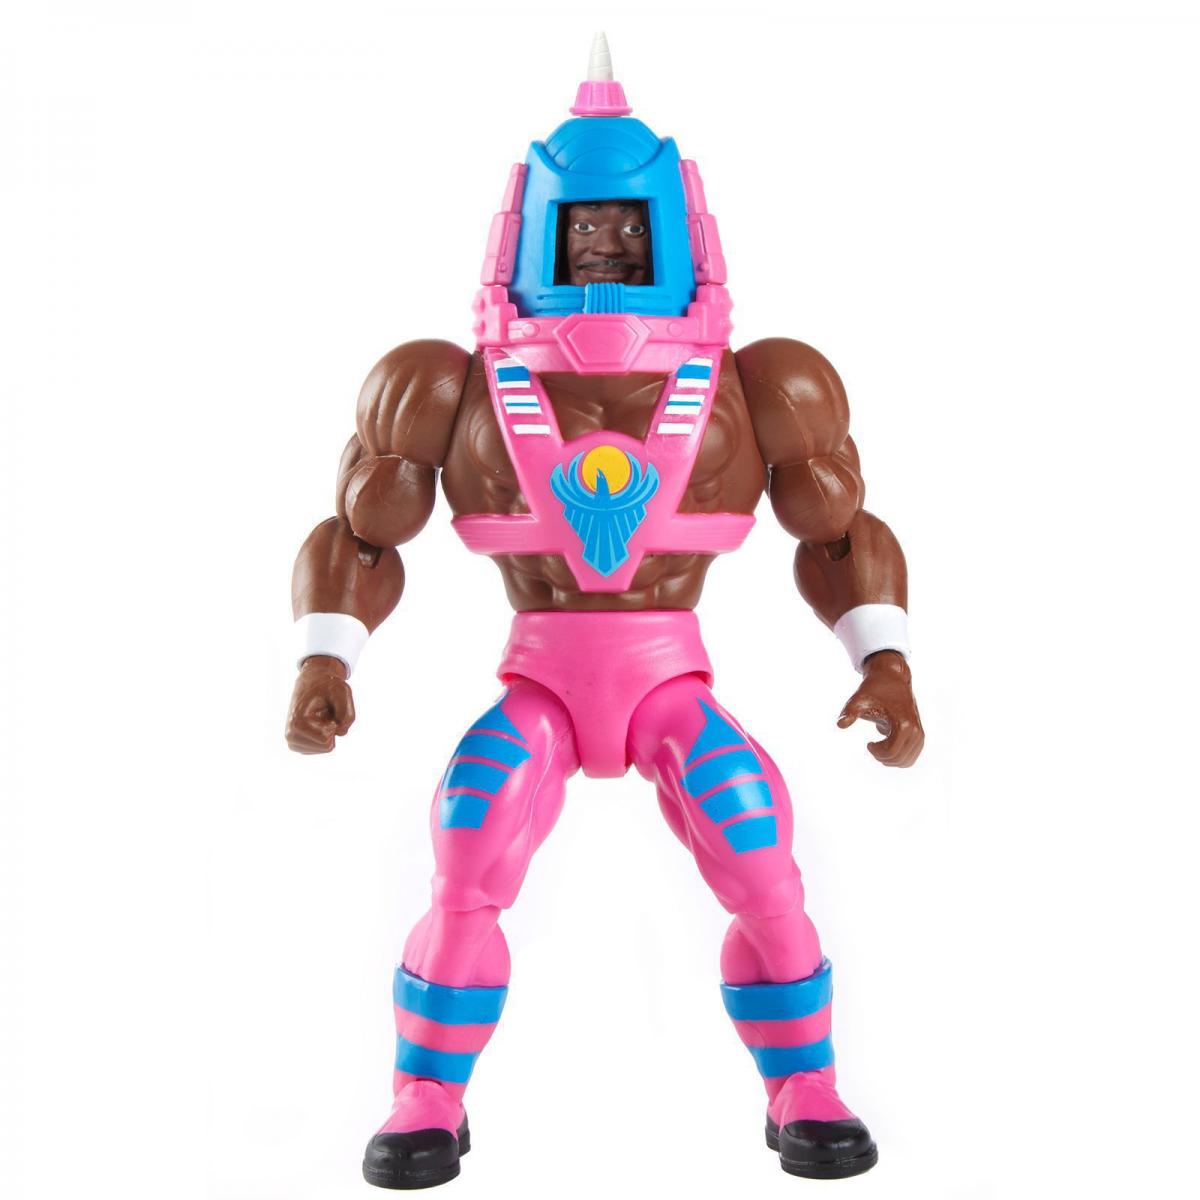 2020 Mattel Masters of the WWE Universe Series 3 The New Day [Exclusive]